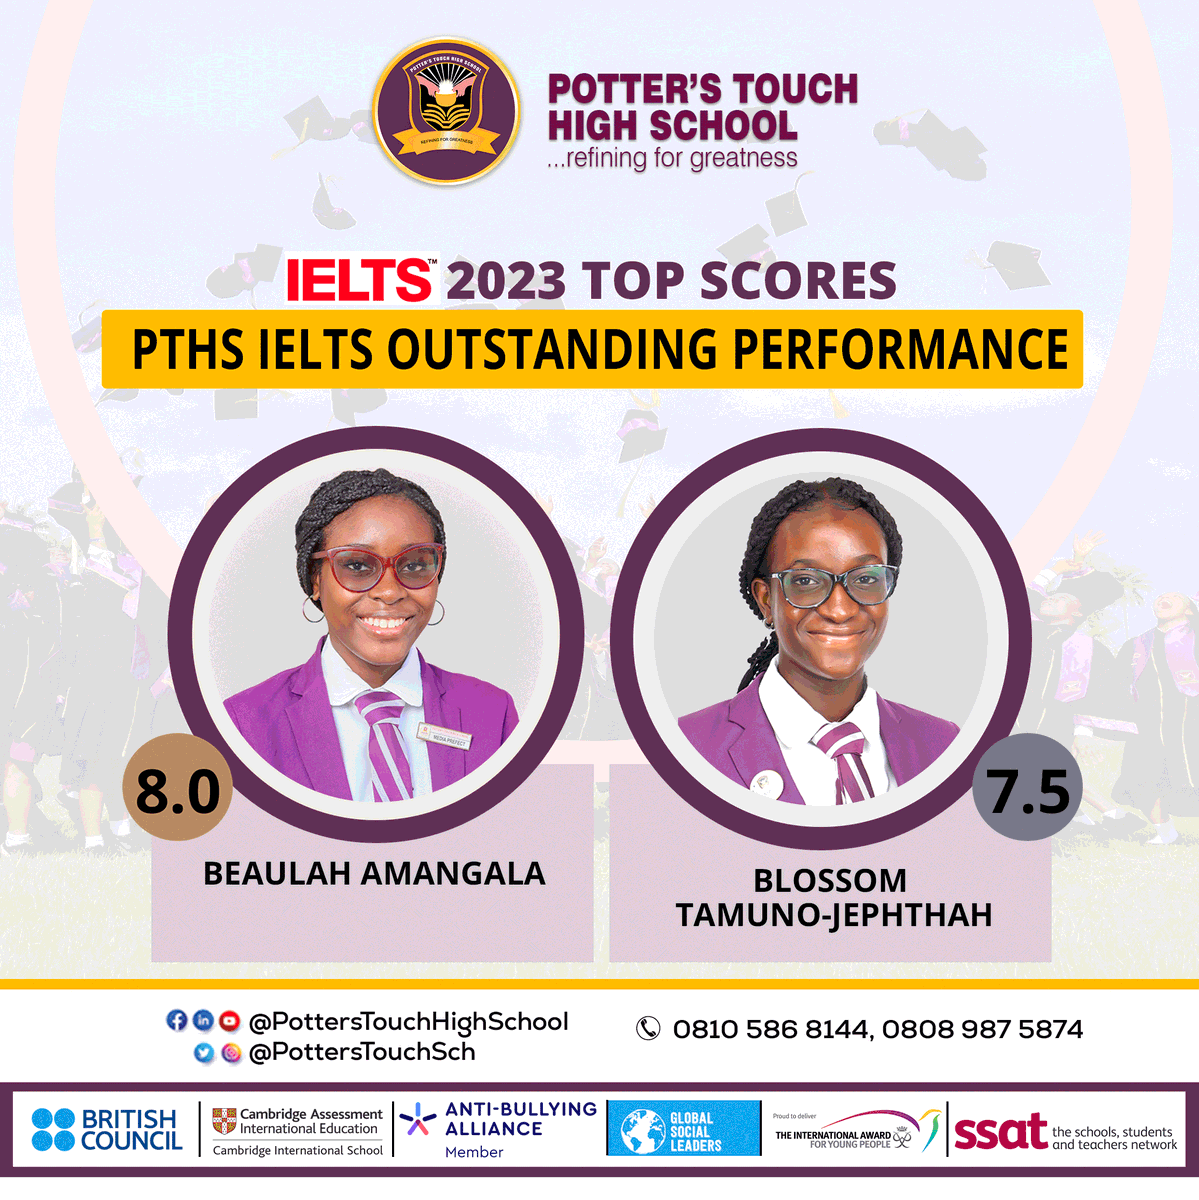 2023 IELTS TOP SCORES

We are delighted to congratulate our students for their outstanding performance in the 2023 Cambridge IELTS tests.
Congratulations to our Flying Stars!

#refiningforgreatness #bestplacetolearn #AcademicTwitter #excellence #excellenceineducation #IELTS